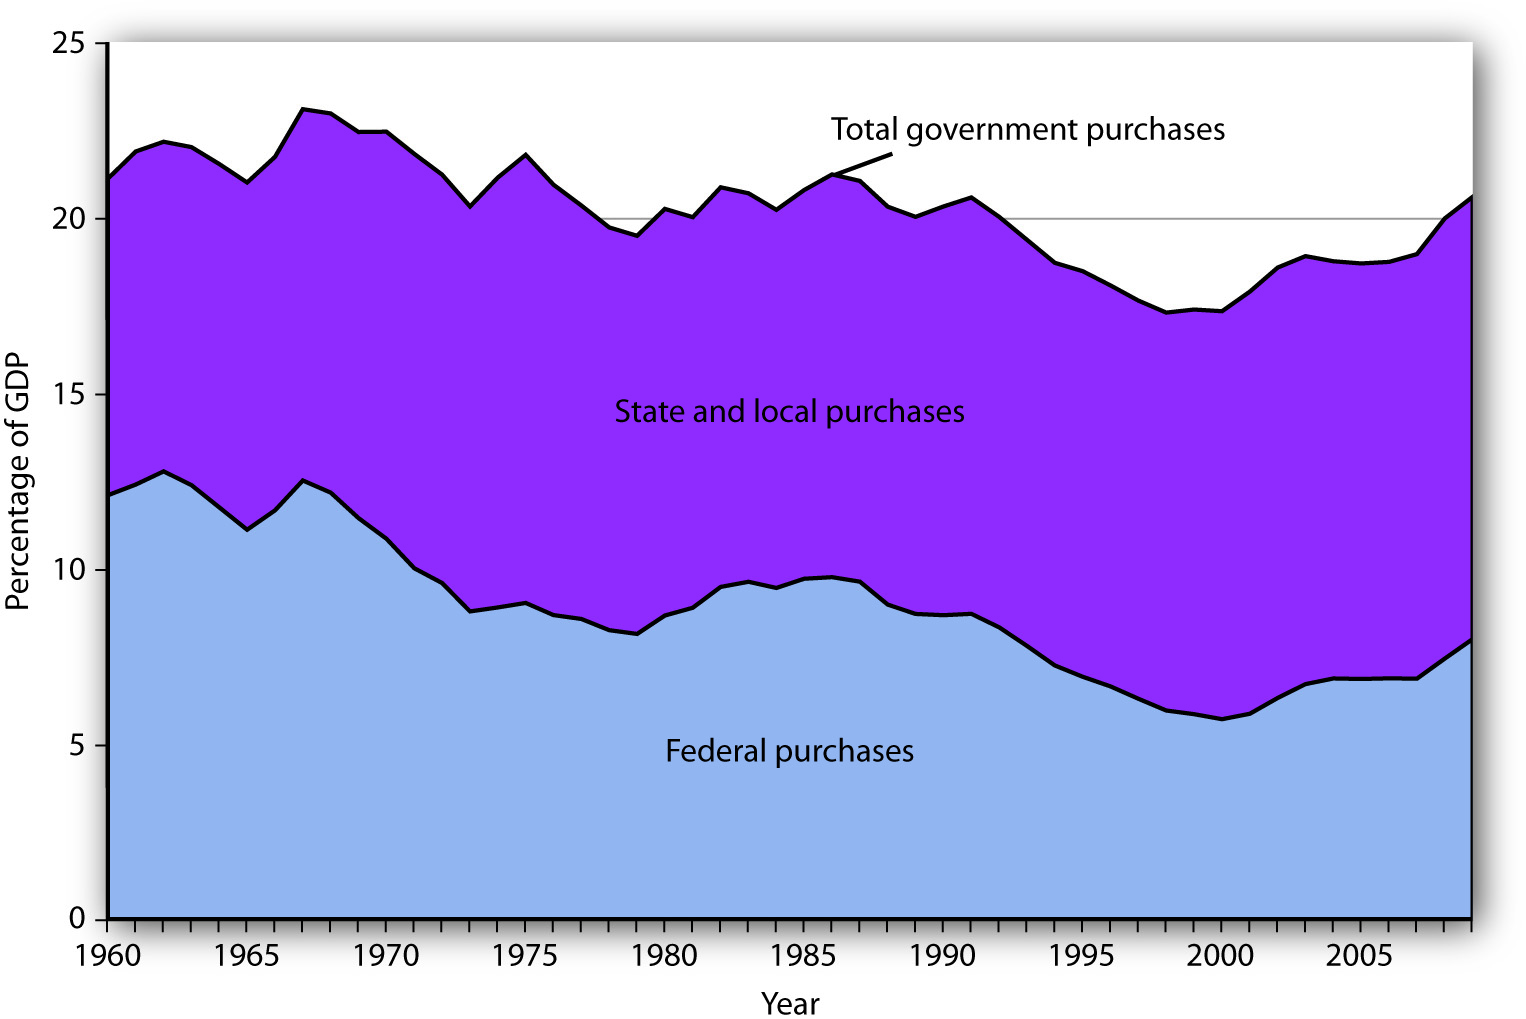 Federal, State, and Local Purchases Relative to GDP. Government purchases were generally above 20% of GDP from 1960 until the early 1990s and then below 20% of GDP until the 2007-2009 recession. The share of government purchases in GDP began rising again in the 21st century.